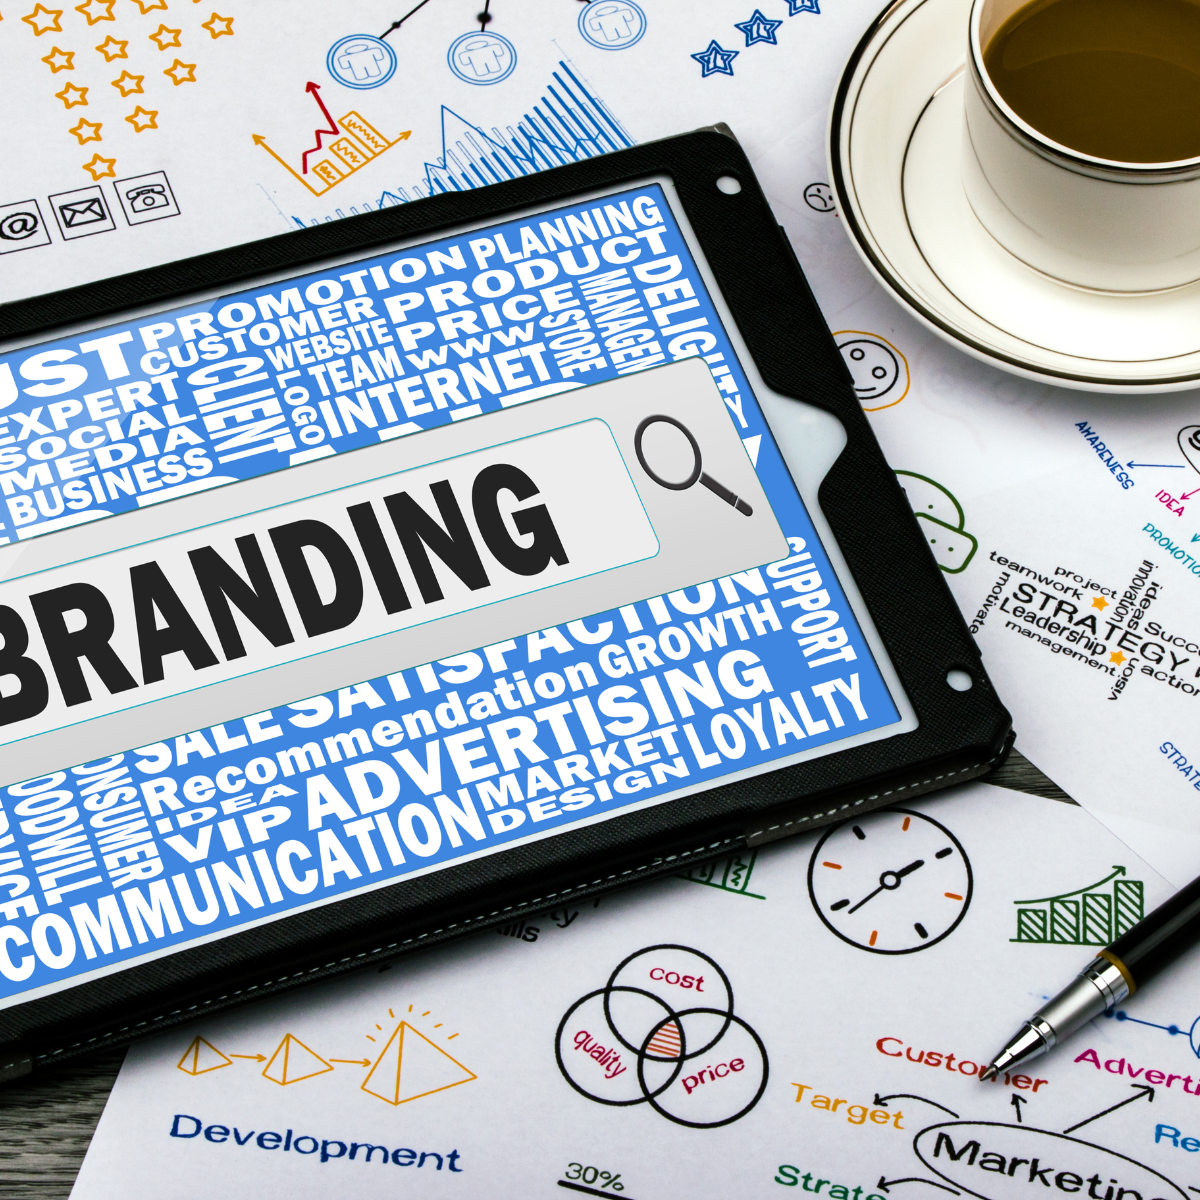 7 Tips For Building Brand Awareness